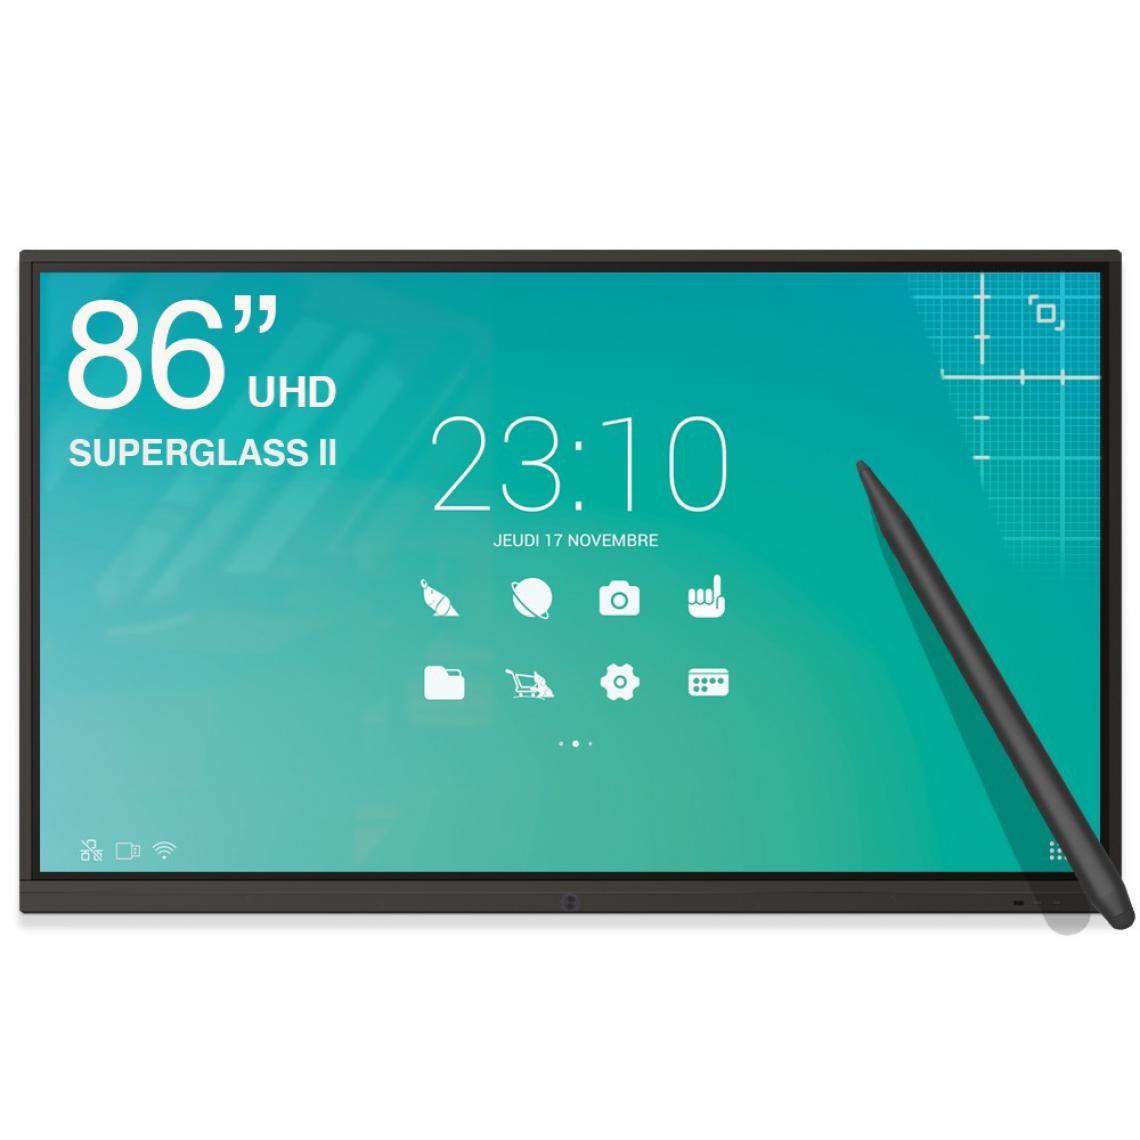 Speechi - Ecran interactif tactile Haute Précision SuperGlass 2 Android 9 SpeechiTouch UHD - 86" - Tablette Android